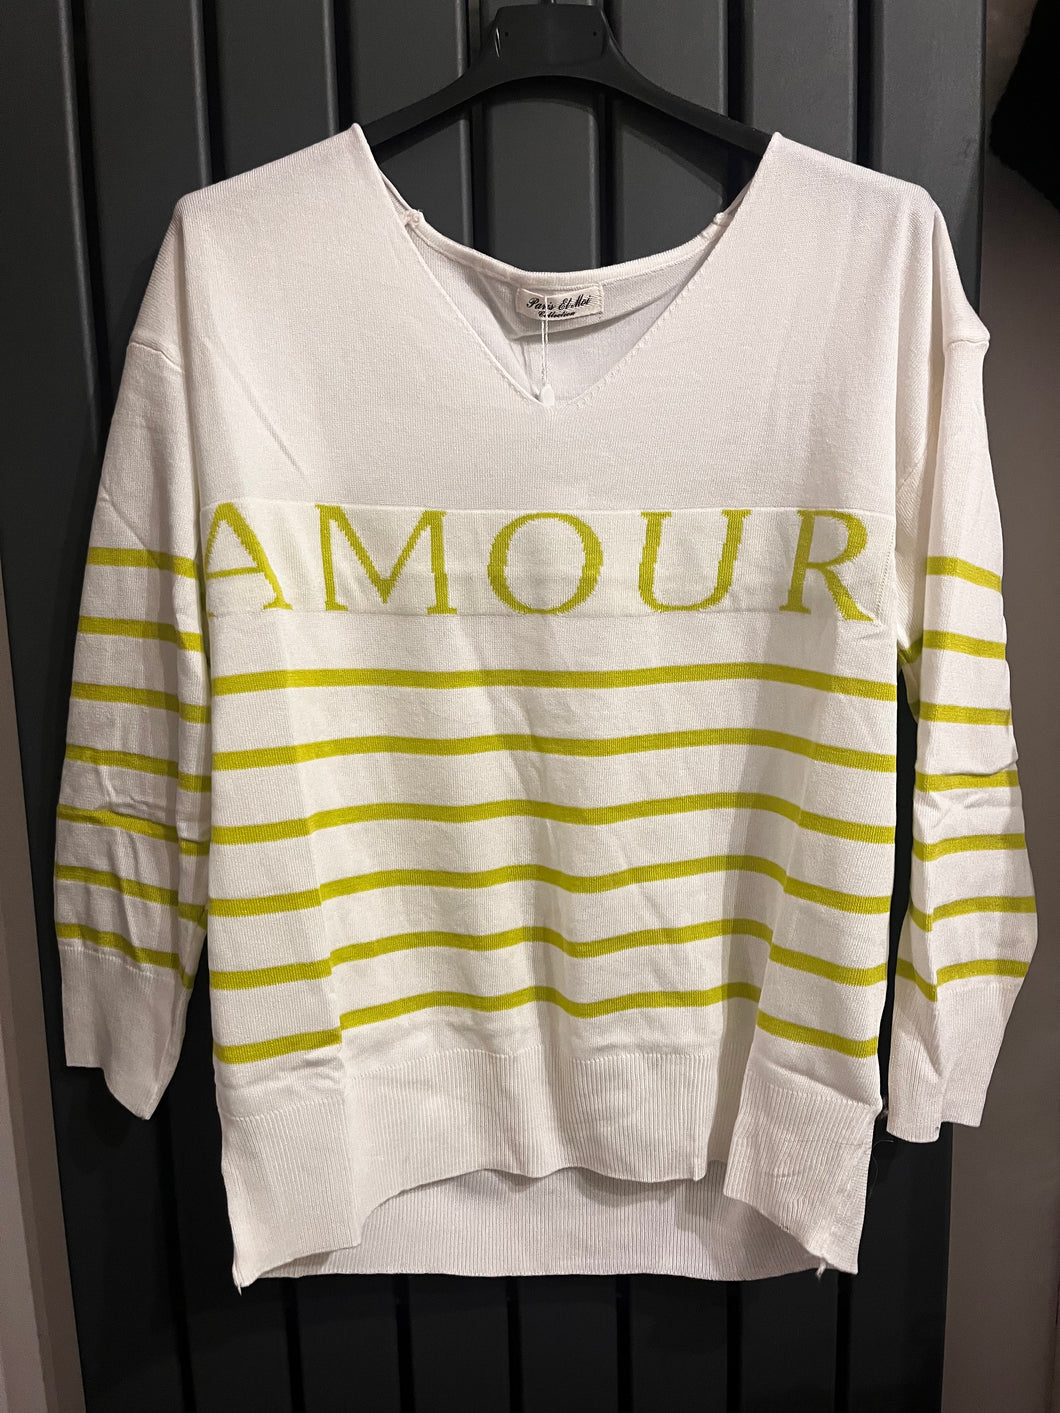 Amour striped jumpers